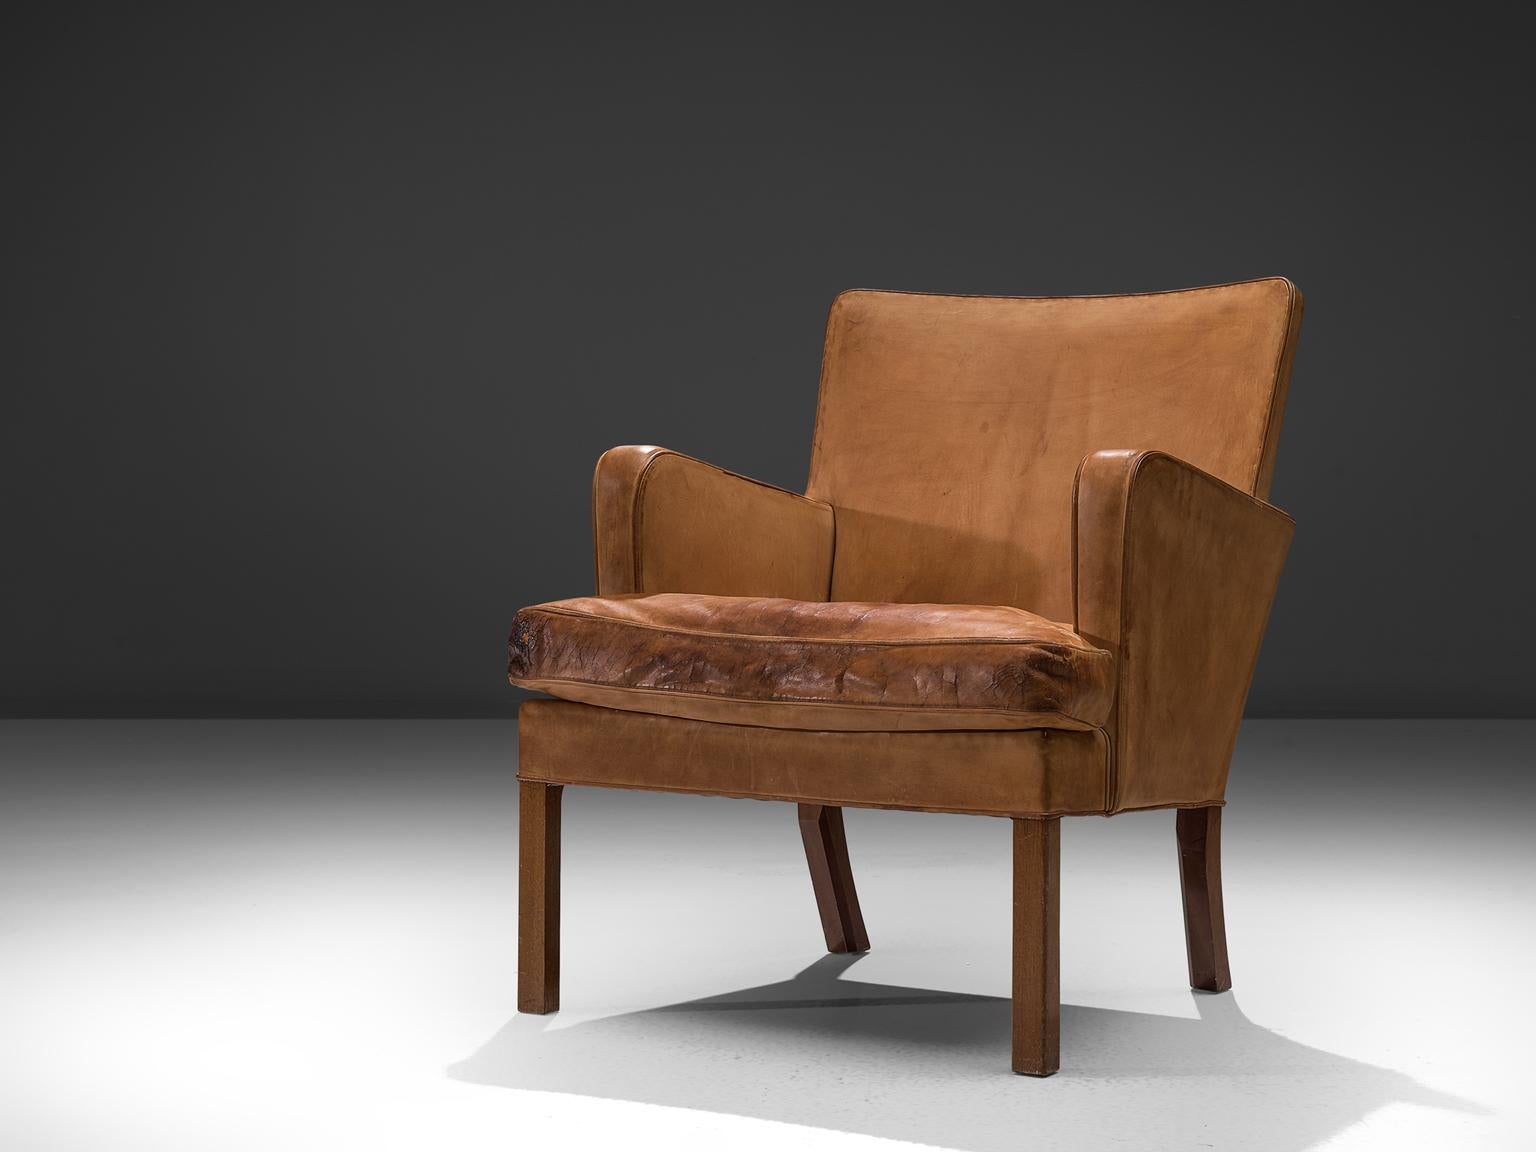 Kaare Klint for Rud. Rasmussen Snedkerier, easy chair model 5313, cognac leather and mahogany, Denmark, 1934.

This chair is the archetypical easy chair as it may, simple, solid and comfortable. As anything from Klint, this chair is anything but